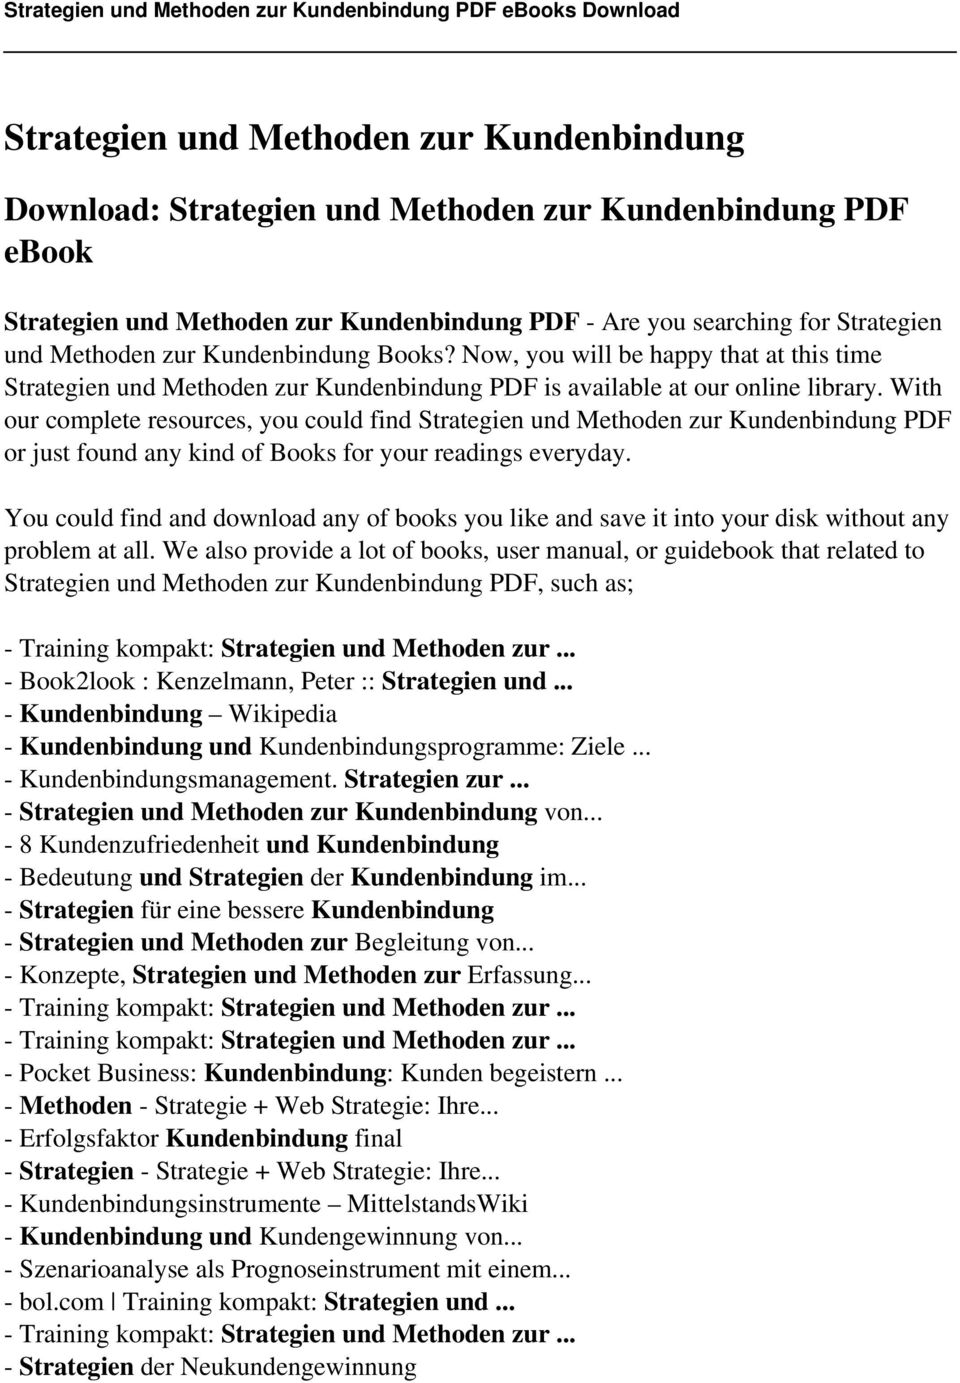 With our complete resources, you could find Strategien und Methoden zur Kundenbindung PDF or just found any kind of Books for your readings everyday.